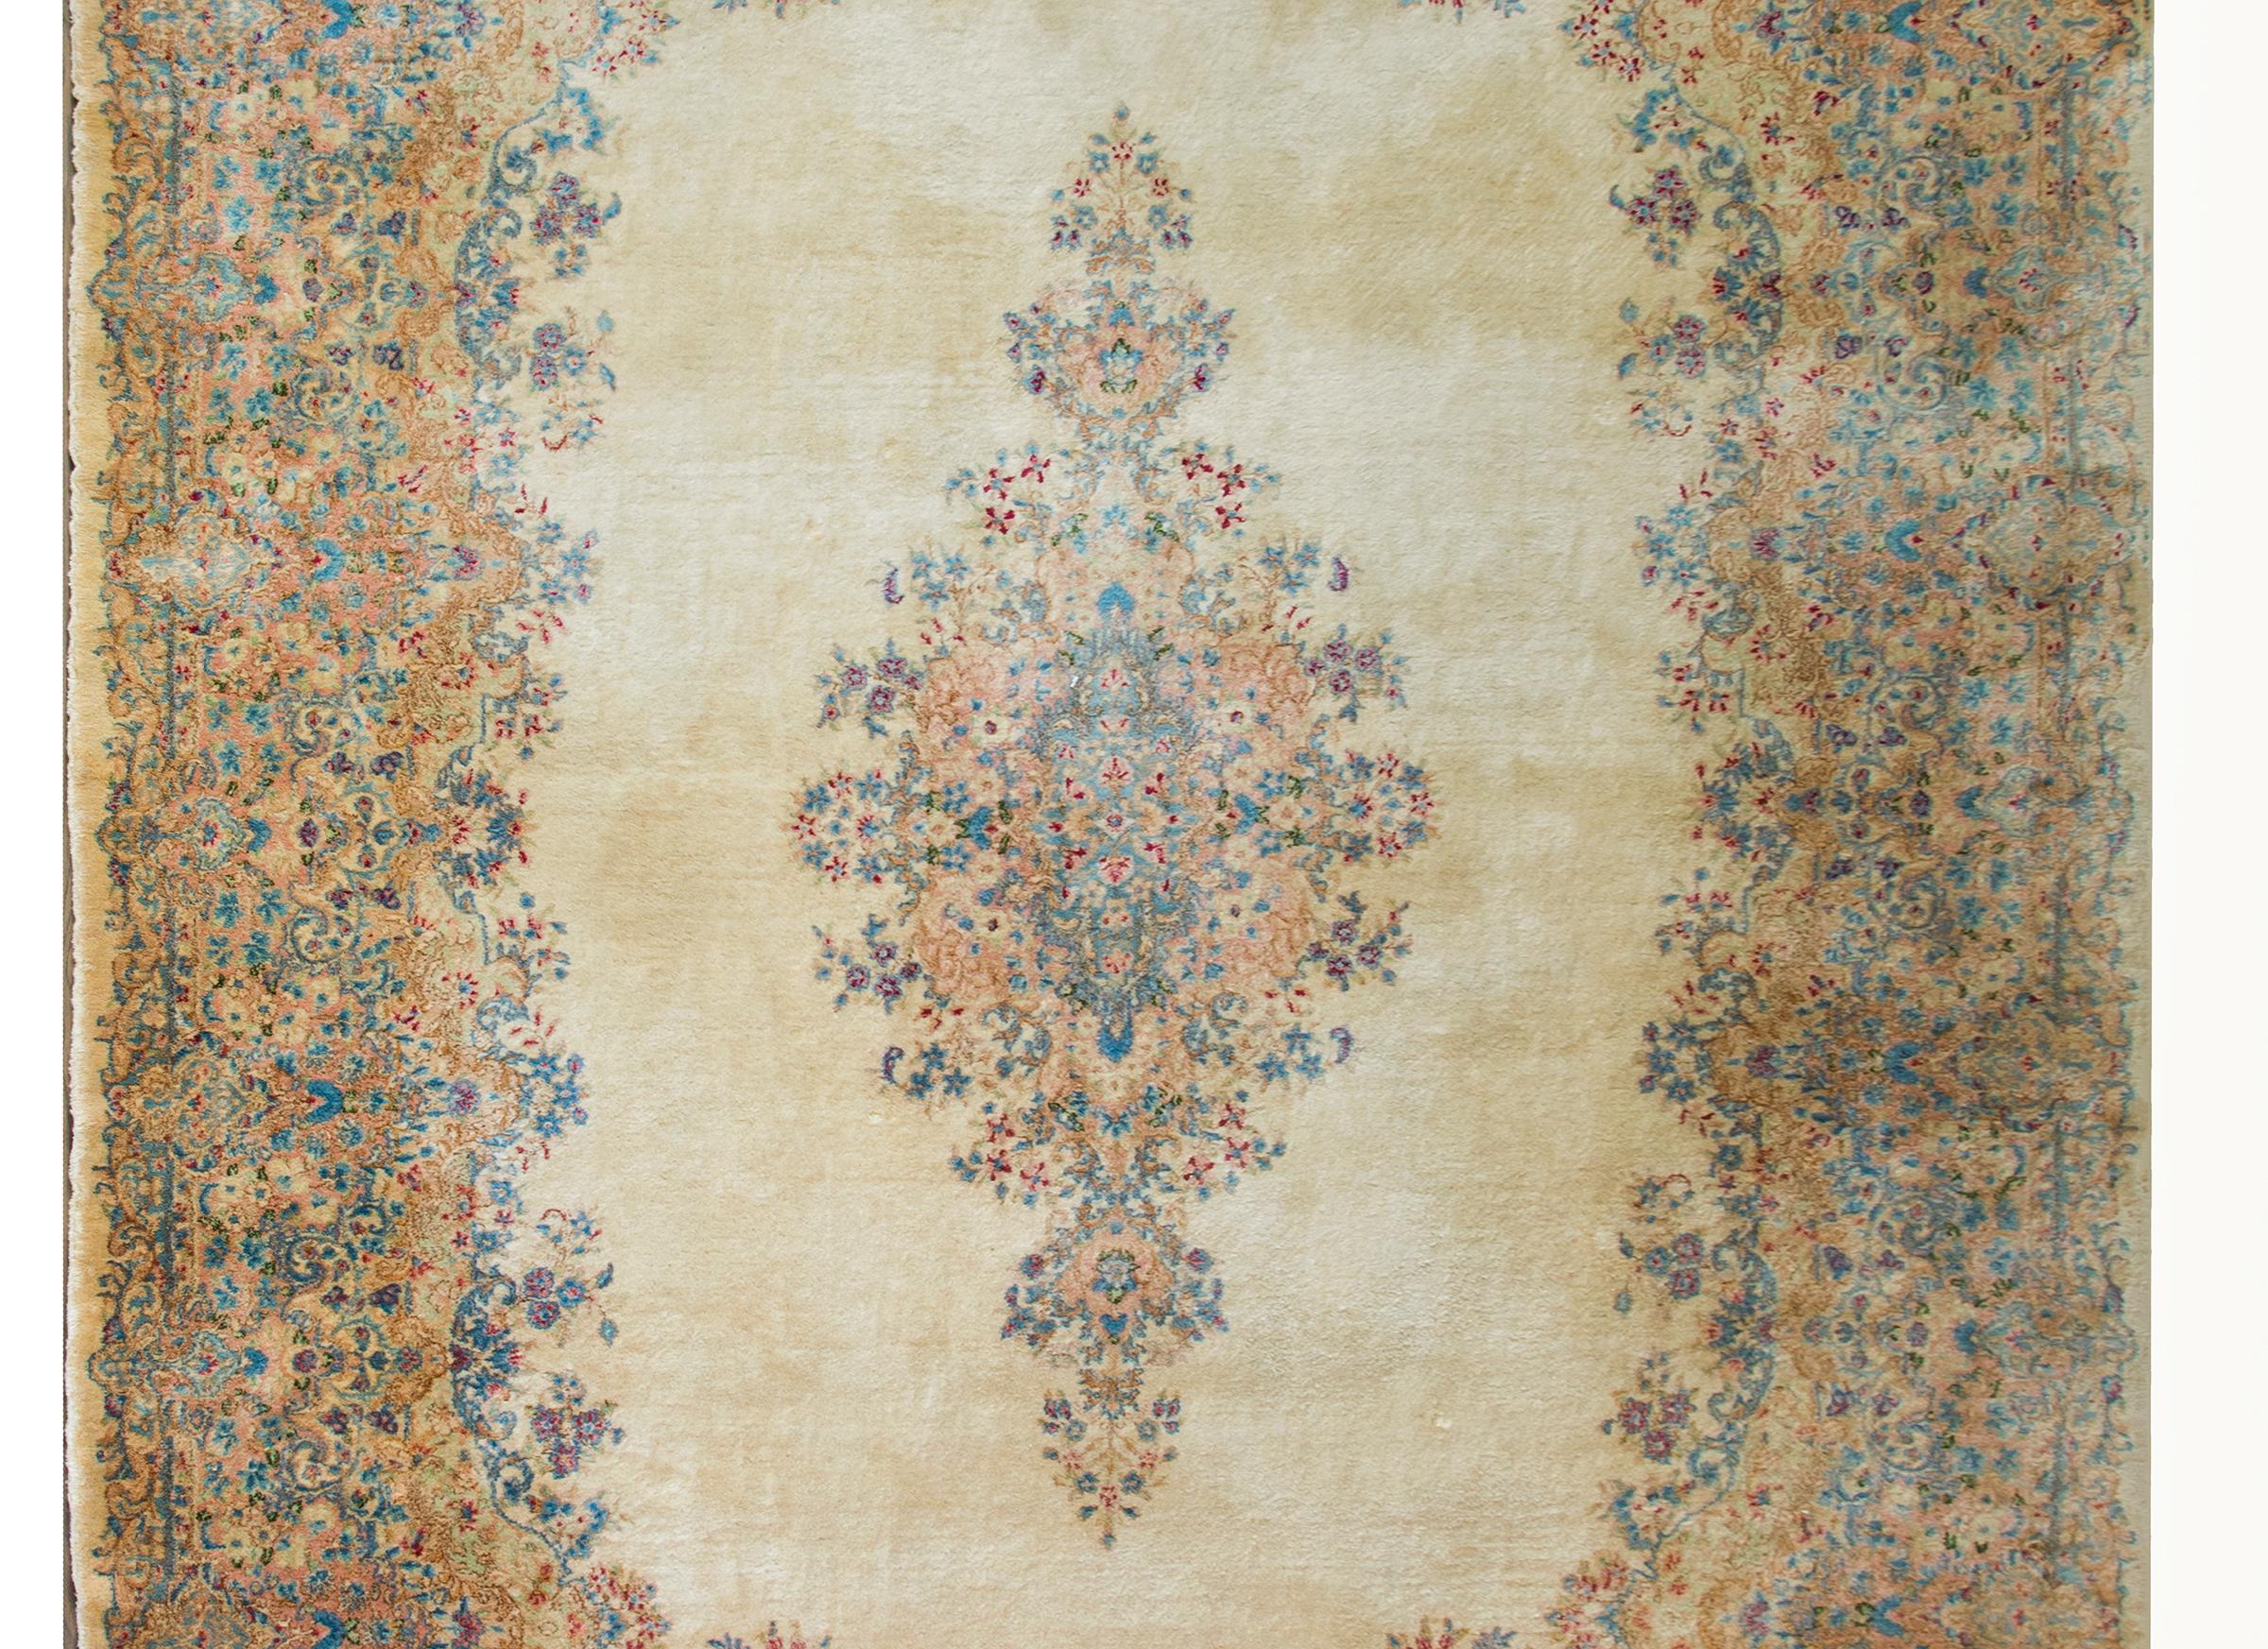 A beautiful early 20th century Persian Kirman rug with a large central floral medallion woven in crimson, peach, green, and light and dark indigo, and set against a cream colored background.  The border is exceptional and wide, and woven with a